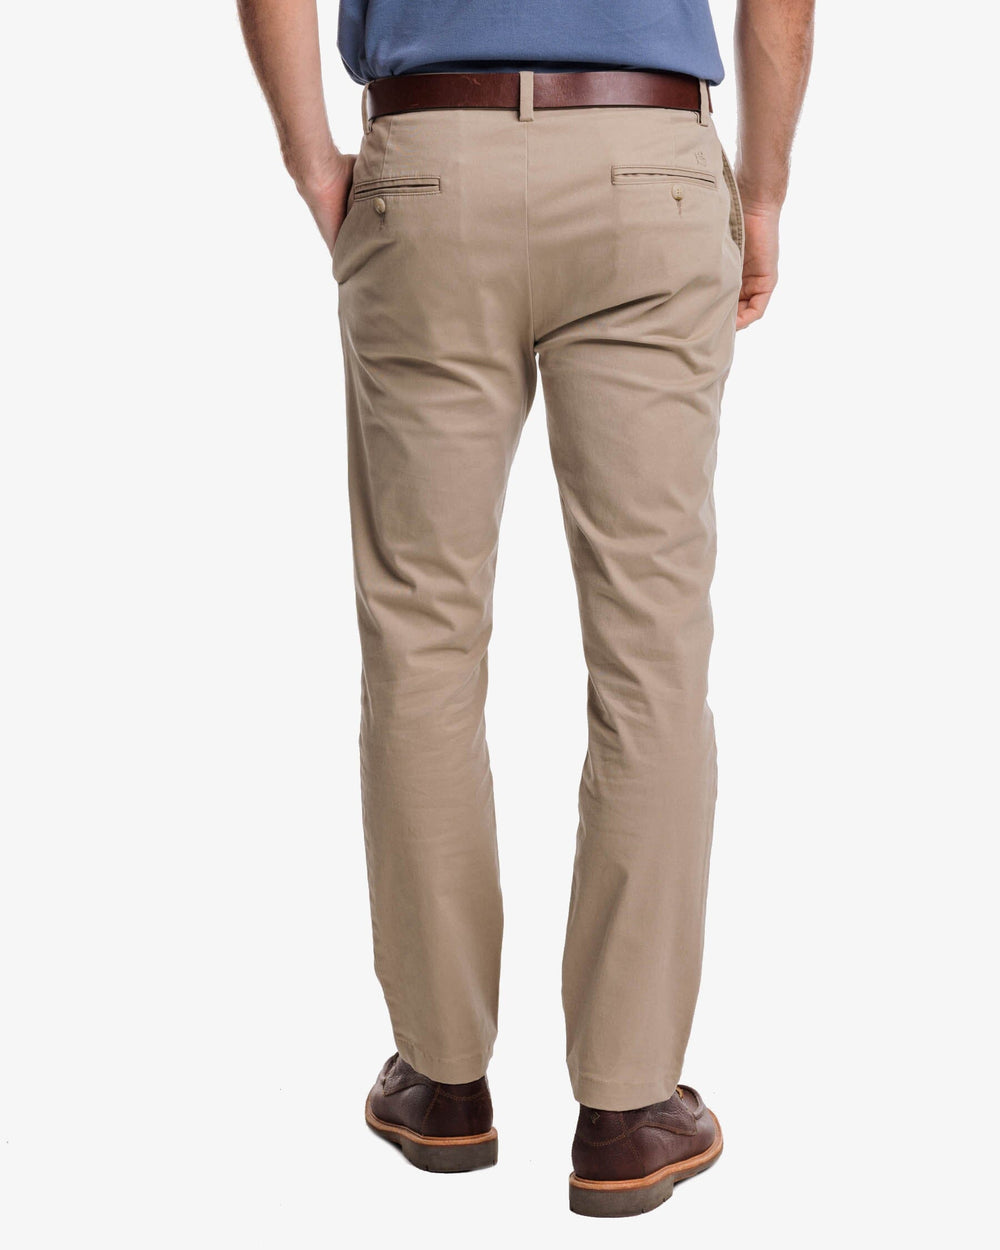 The back view of the Southern Tide Channel Marker Chino Pant by Southern Tide - Sandstone Khaki